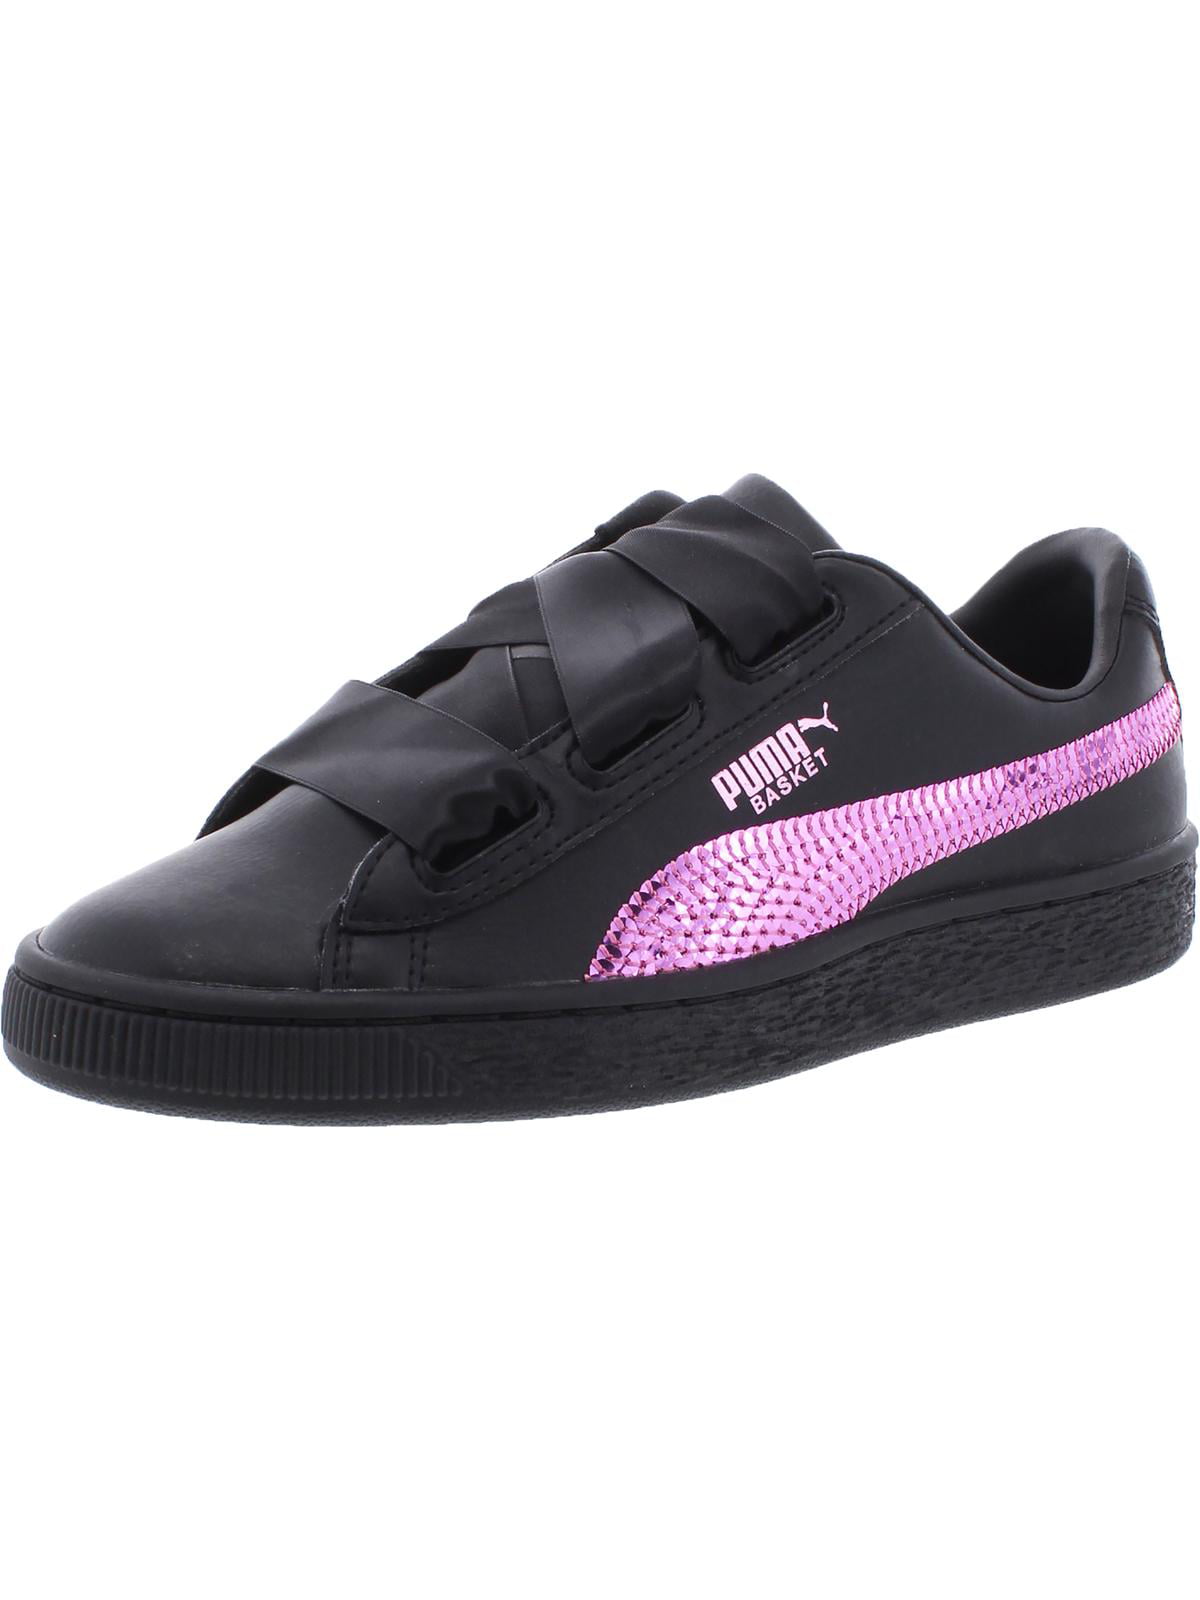 Buy > puma shoes for kids girls > in stock